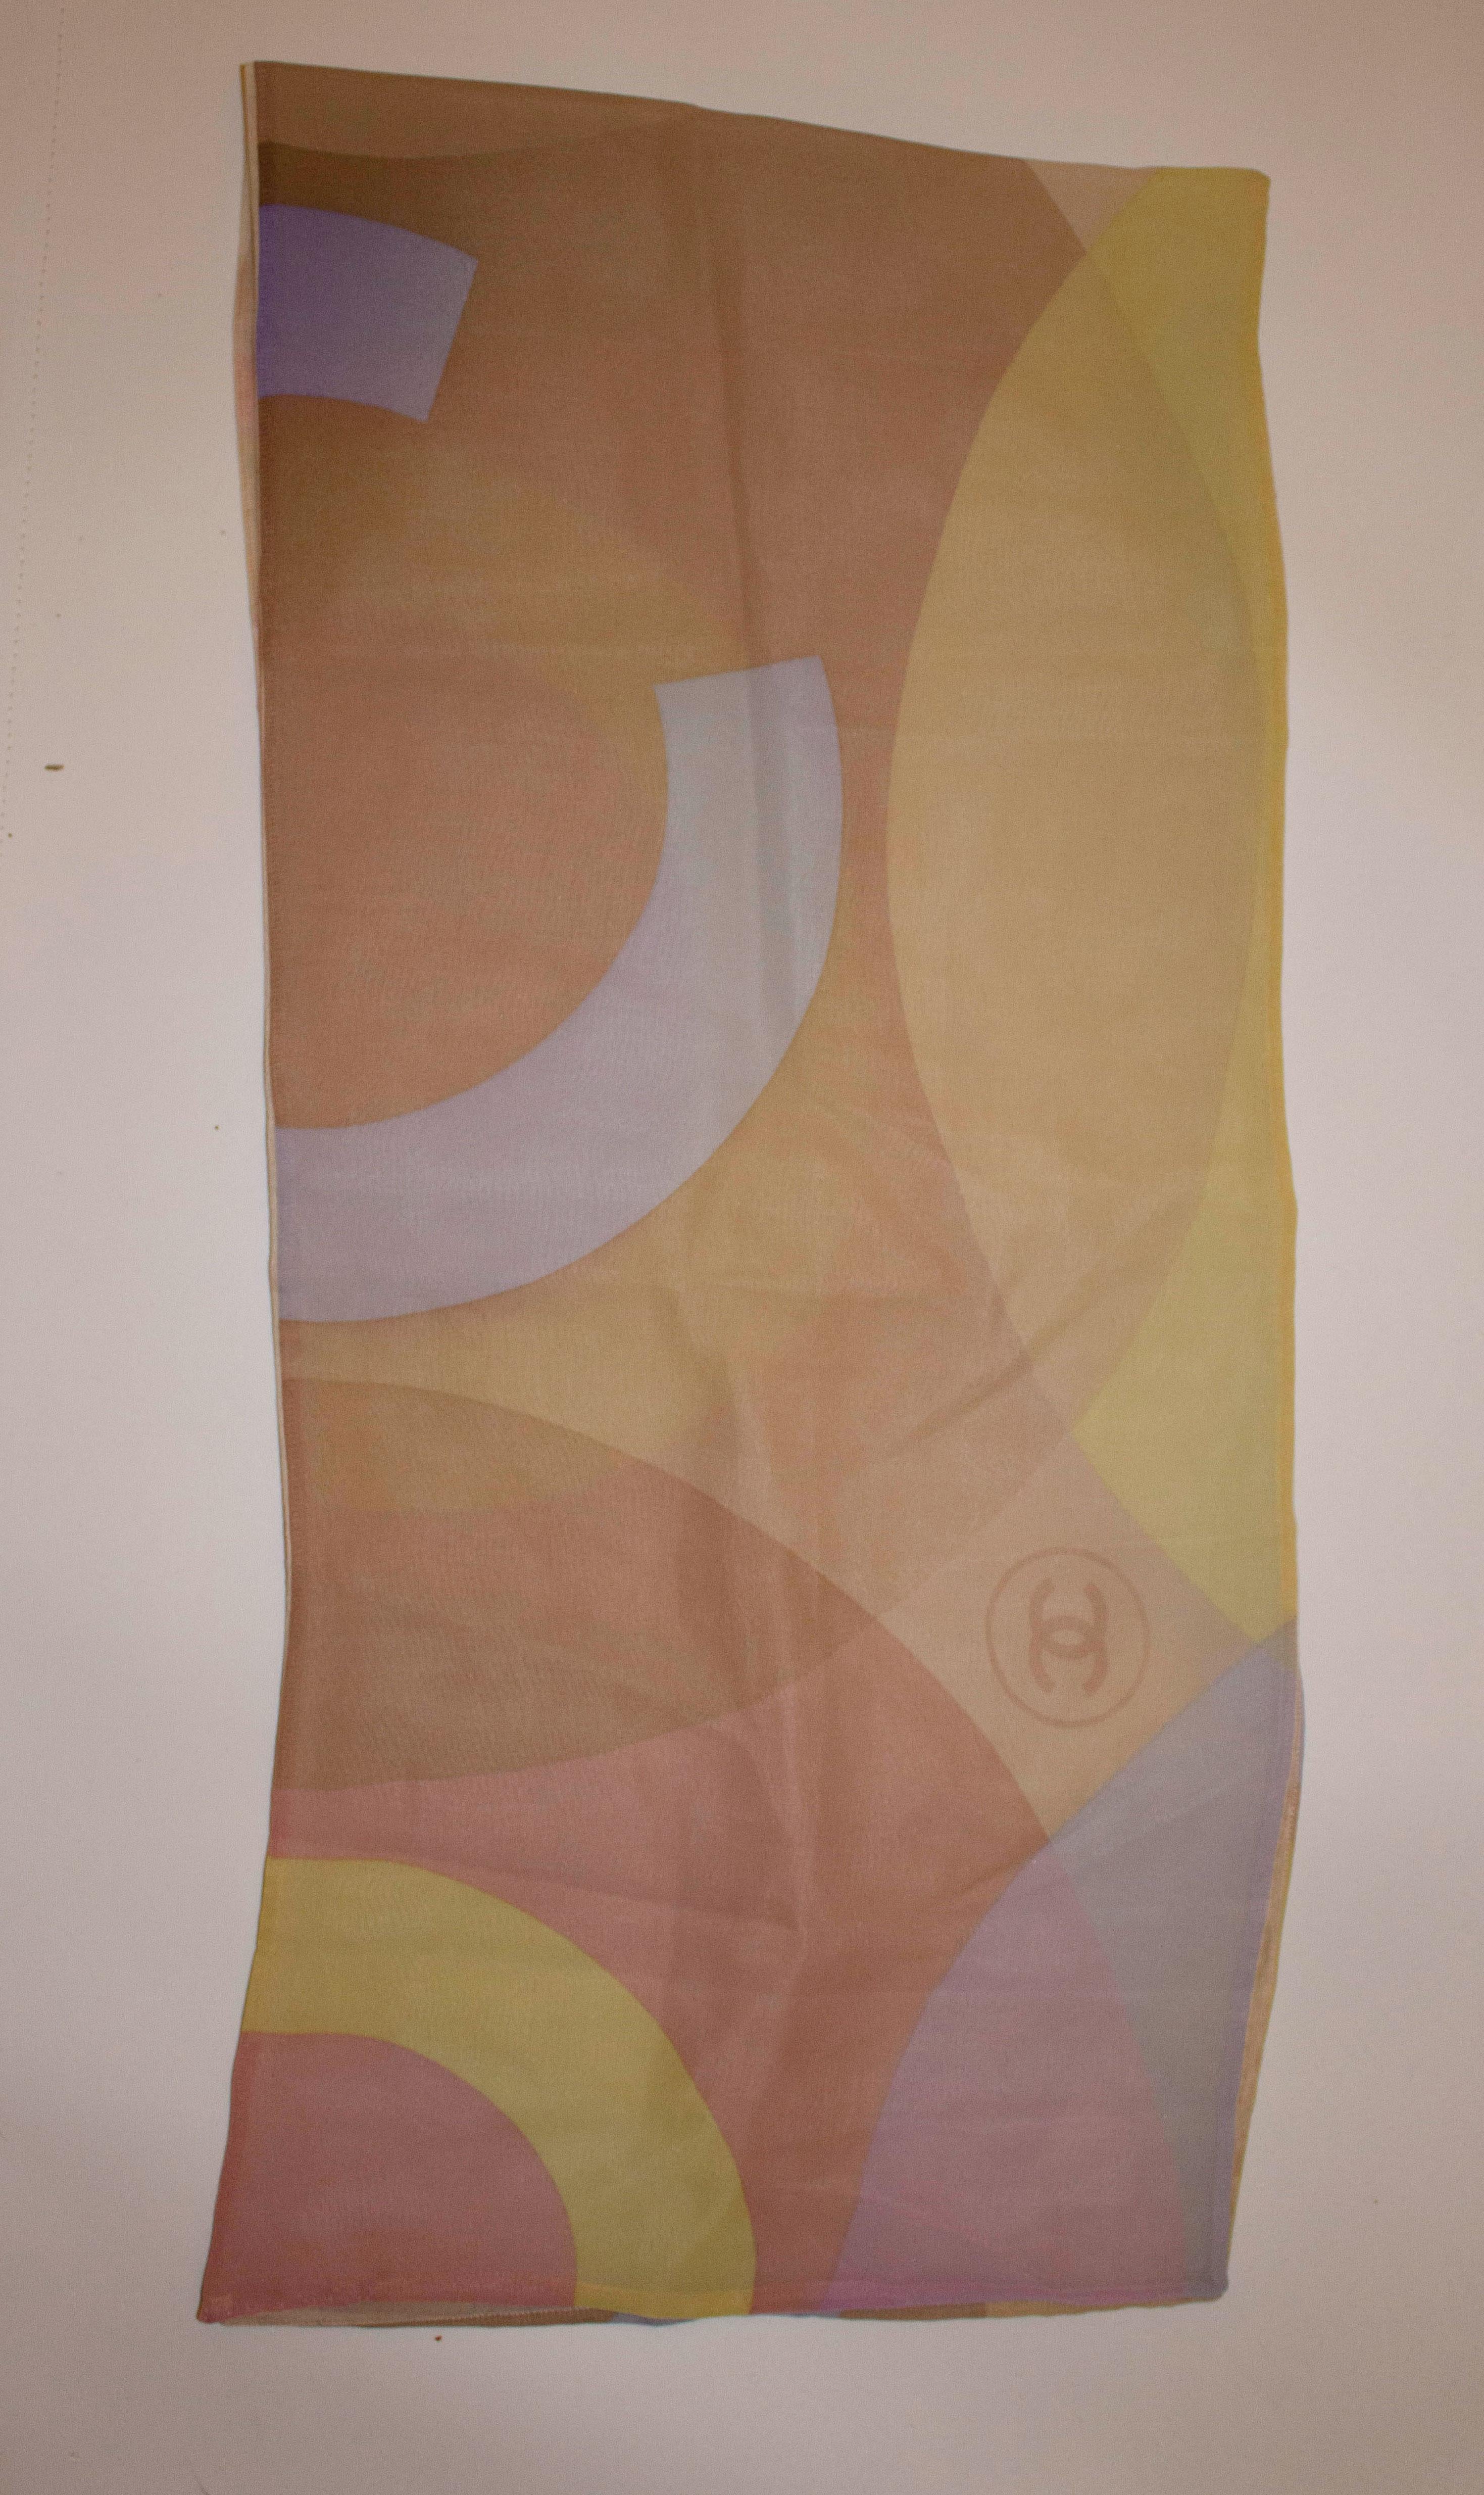 A pretty Chanel silk scarf  for Spring / Summer in a mix of colours, pink, yellow ,caramel and blue . The scarf  has the Chanel logo incorporated into the fabric. 
Measurements: length 54''  width 12 1/2''